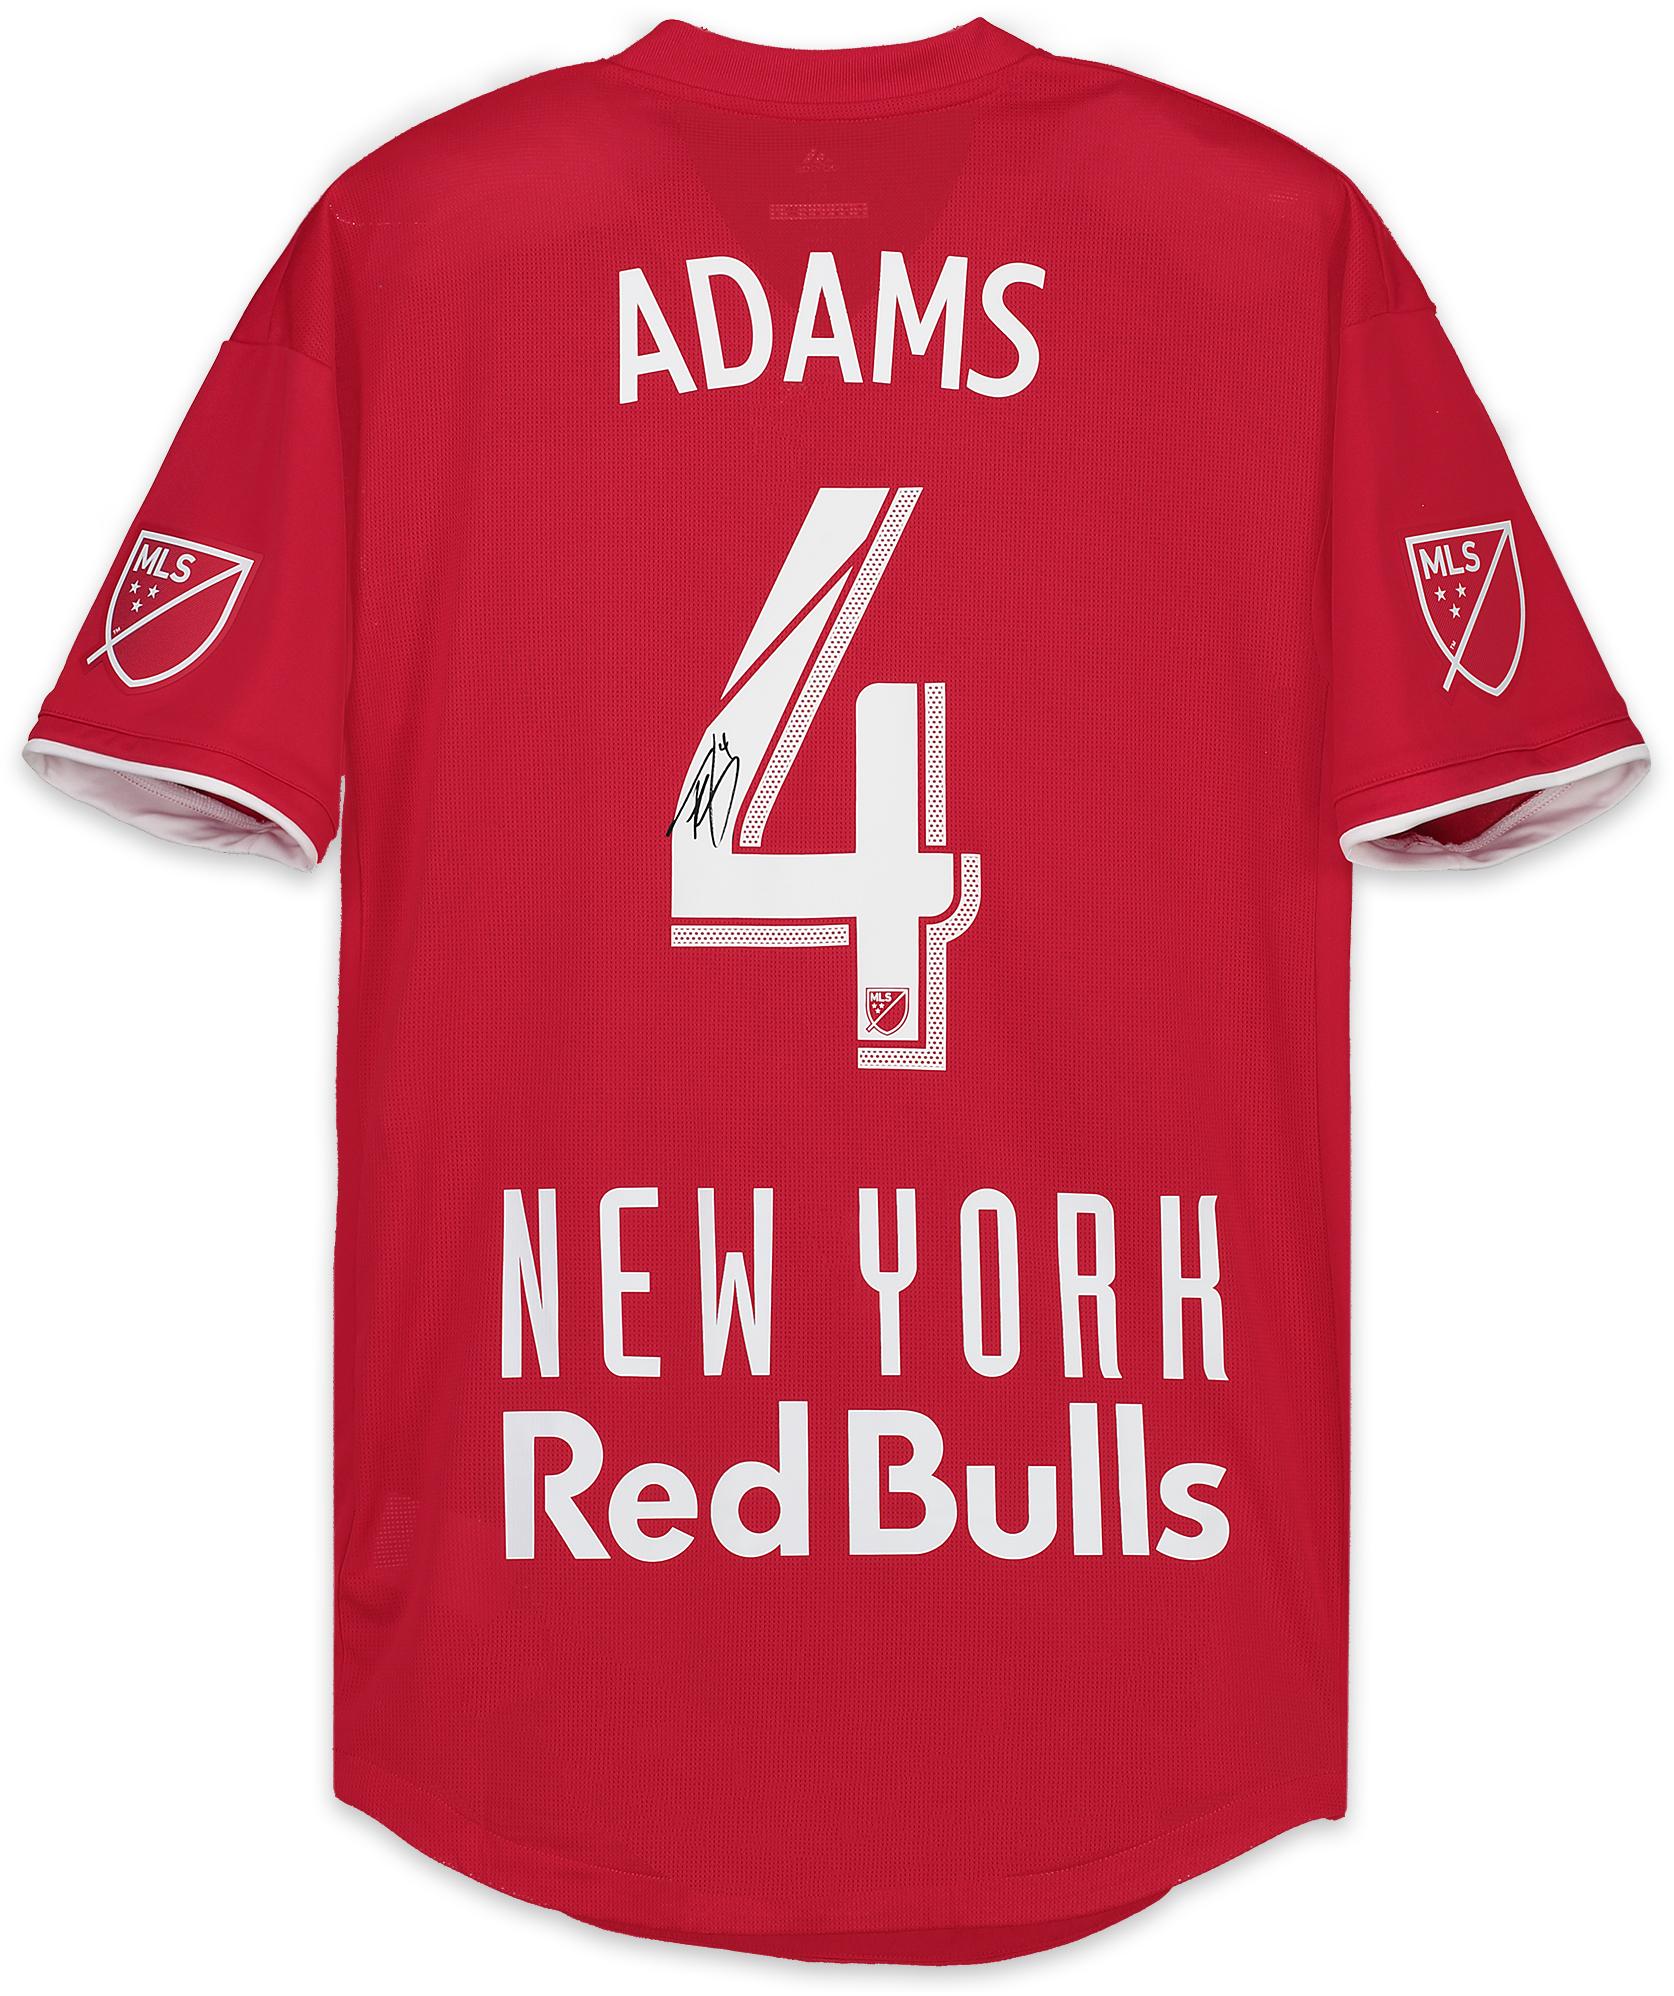 Tyler Adams New York Red Bulls Autographed Match-Used Red #4 Jersey from the 2018 MLS Season - Fanatics Authentic Certified